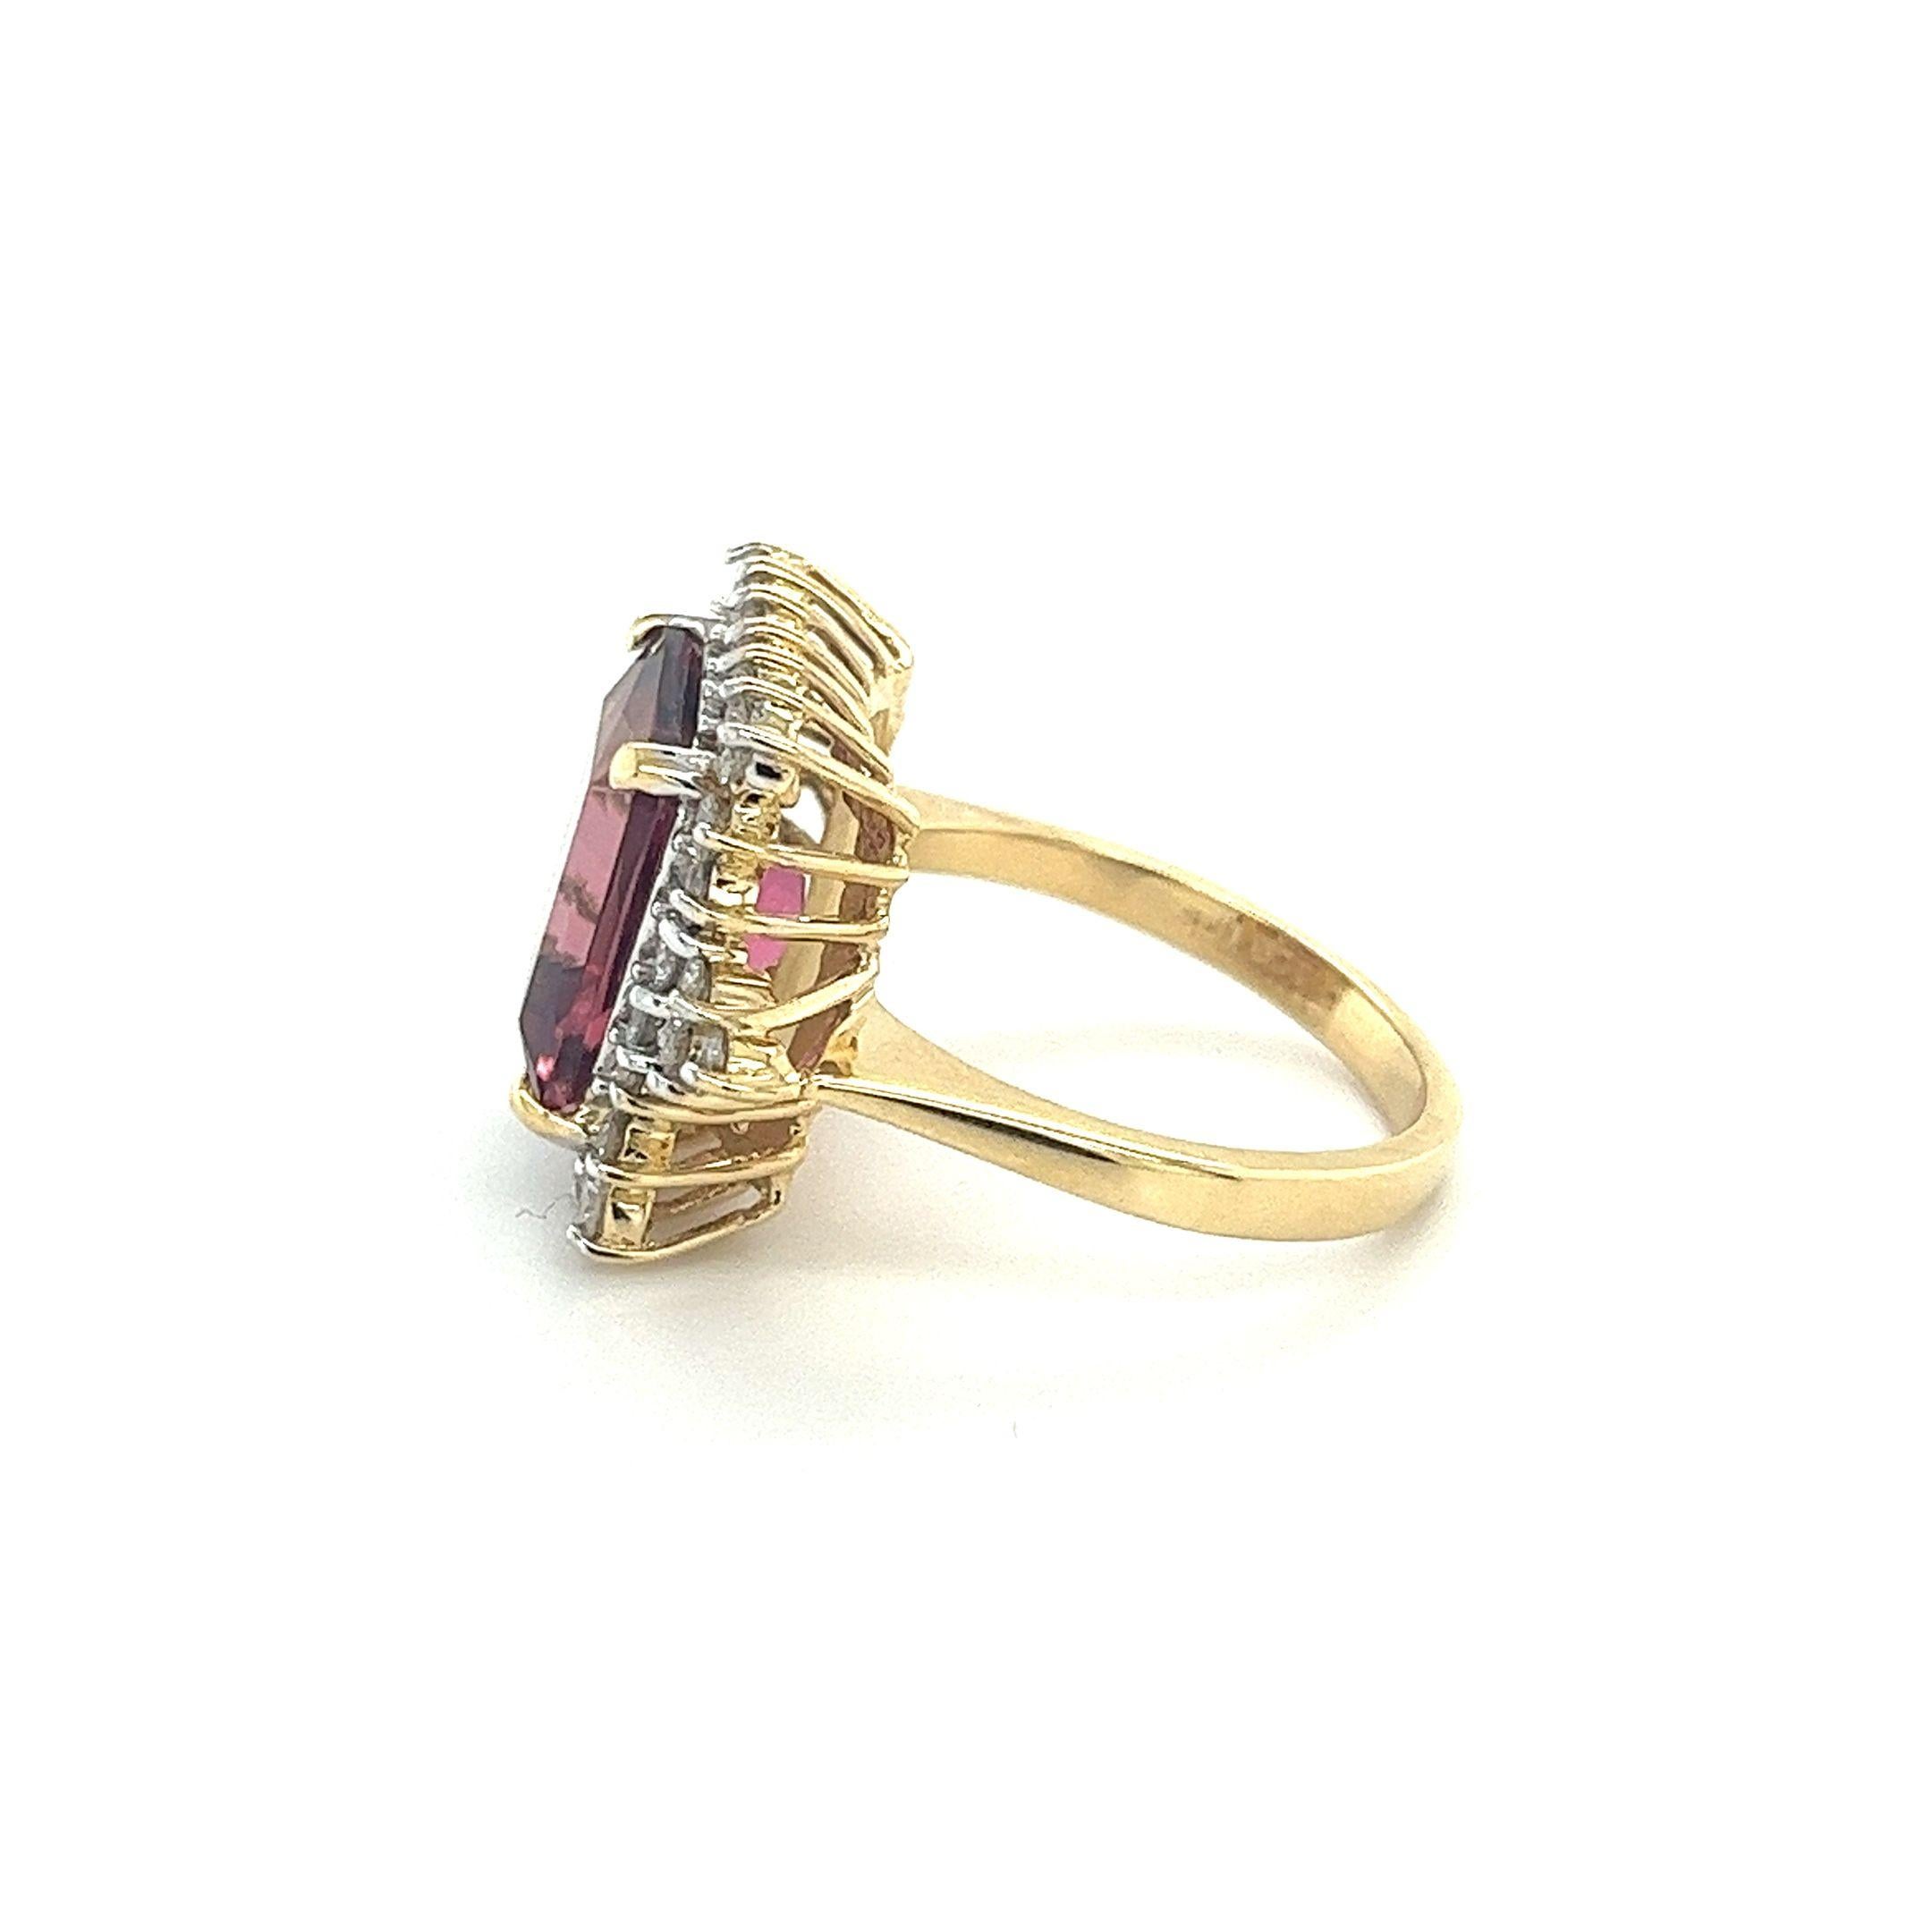 Modern Natural Vivid Pink 7 Carat Radiant Cut Tourmaline Ring With Diamonds in 18K Gold For Sale